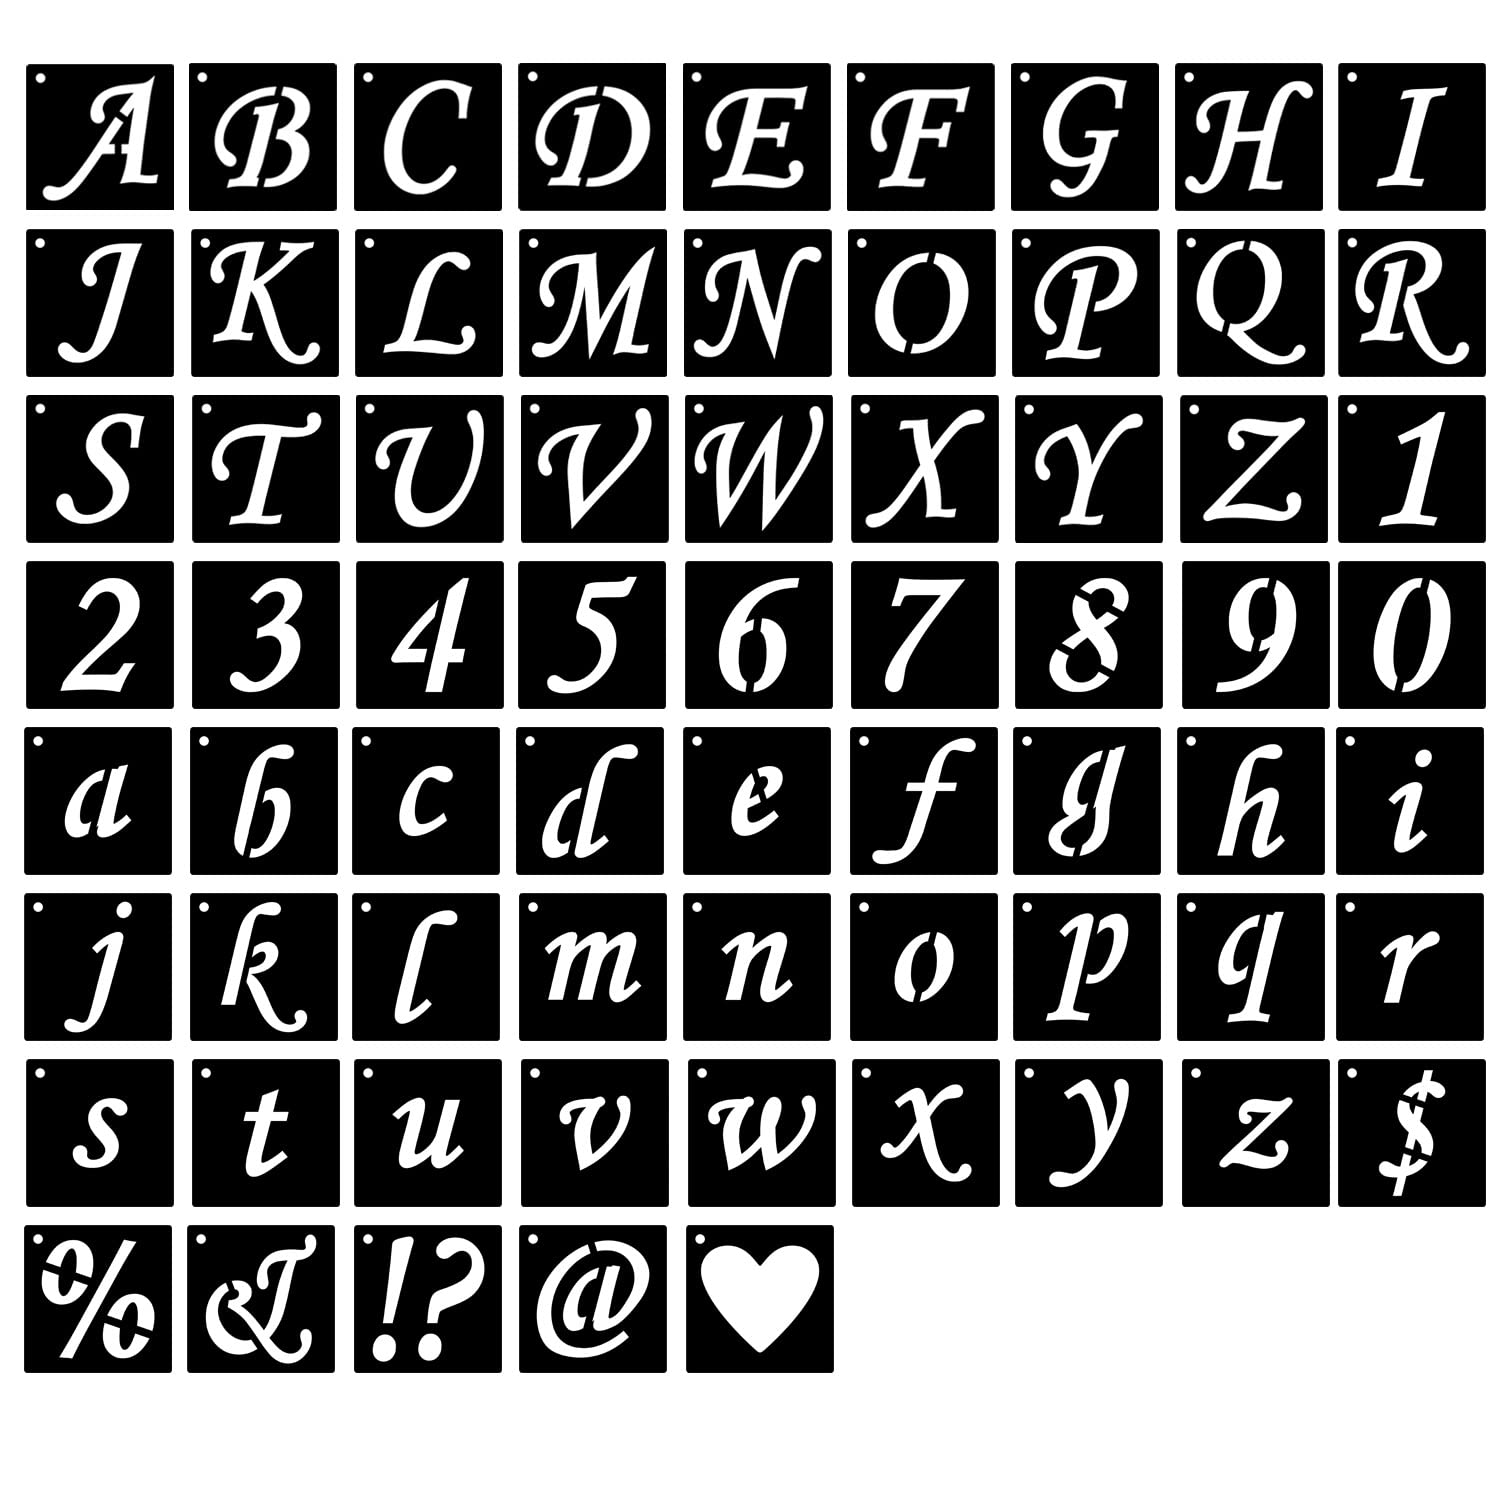 Eage Alphabet Letter Stencils 2 Inch, 68 Pcs Reusable Plastic Letter Number Symbol Stencil Kit For Painting On Wood, Wall, Fabri